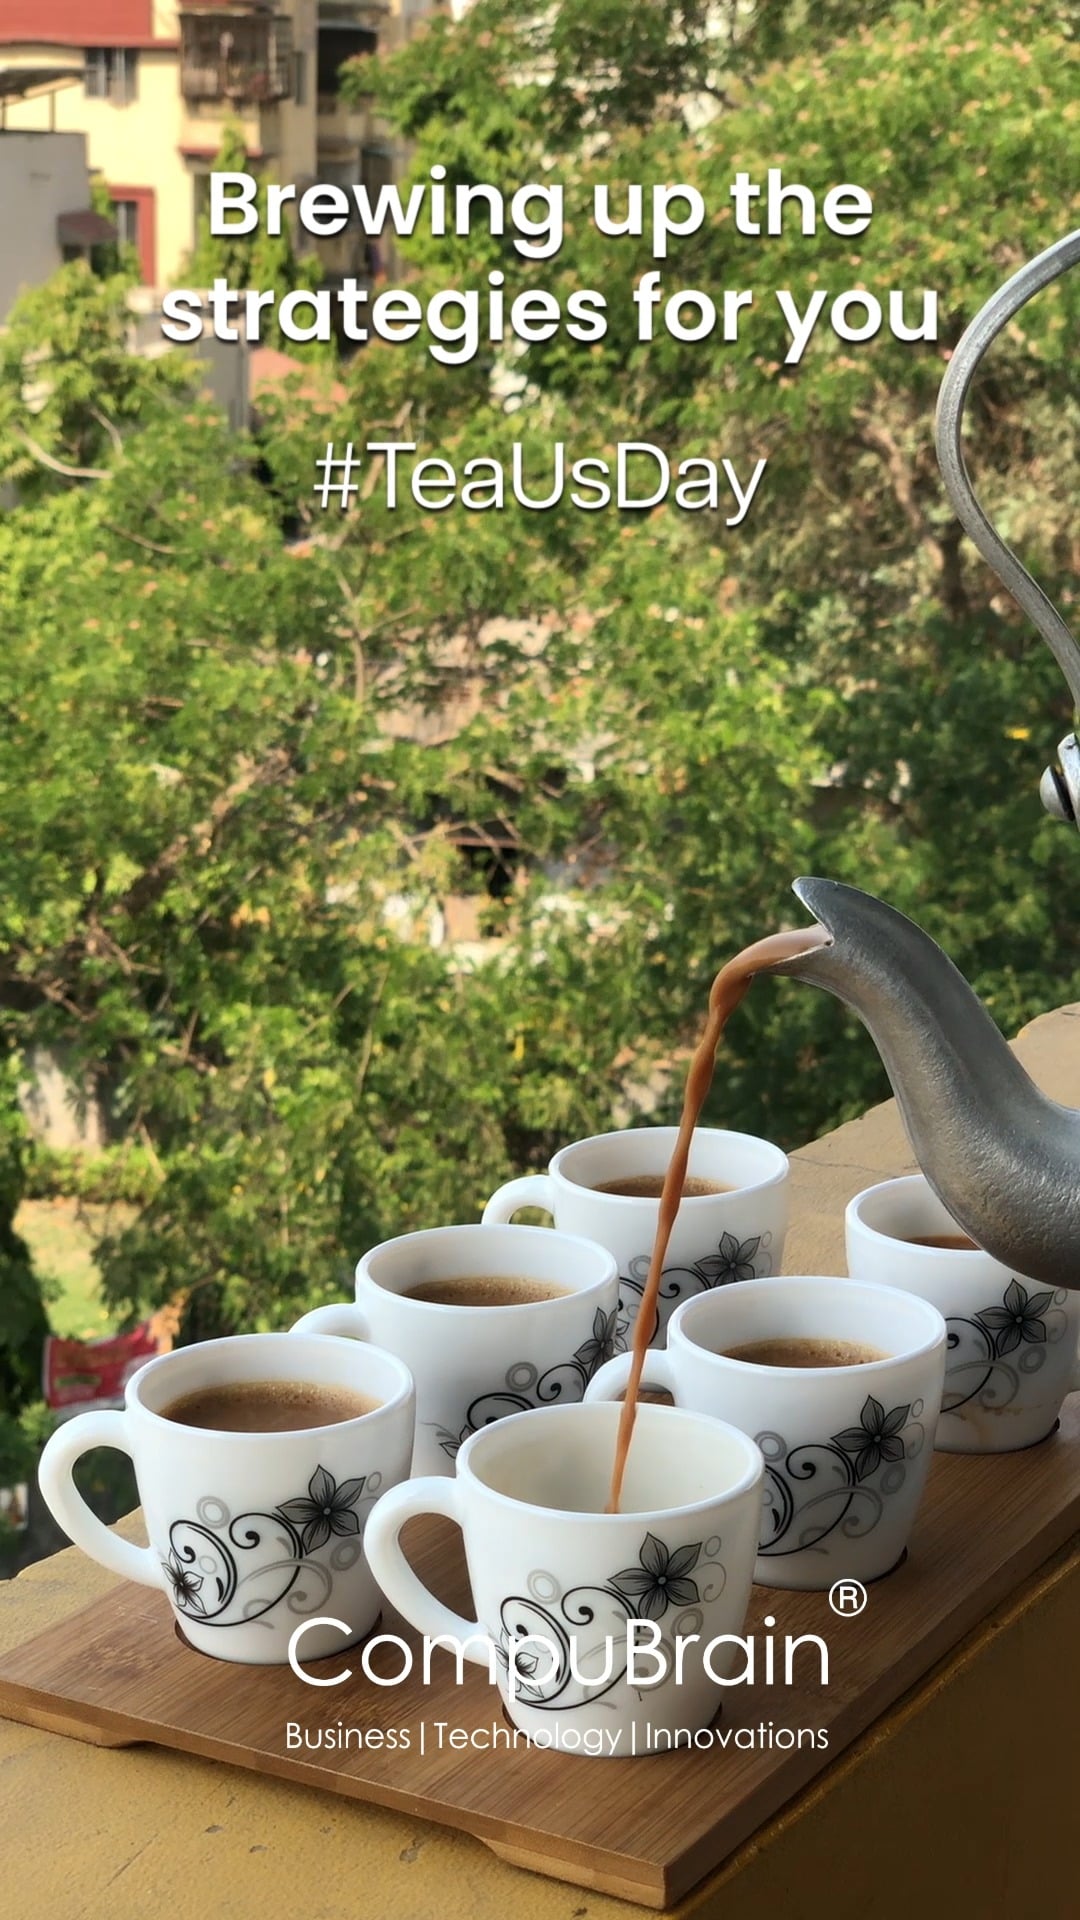 Understanding that you are in love with the shape of your dreams;
We brew them into reali-tea by incorporating the correct strategies.

#teausday #compubrain #business #technology #innovations #reels #reelitfeelit #instareels